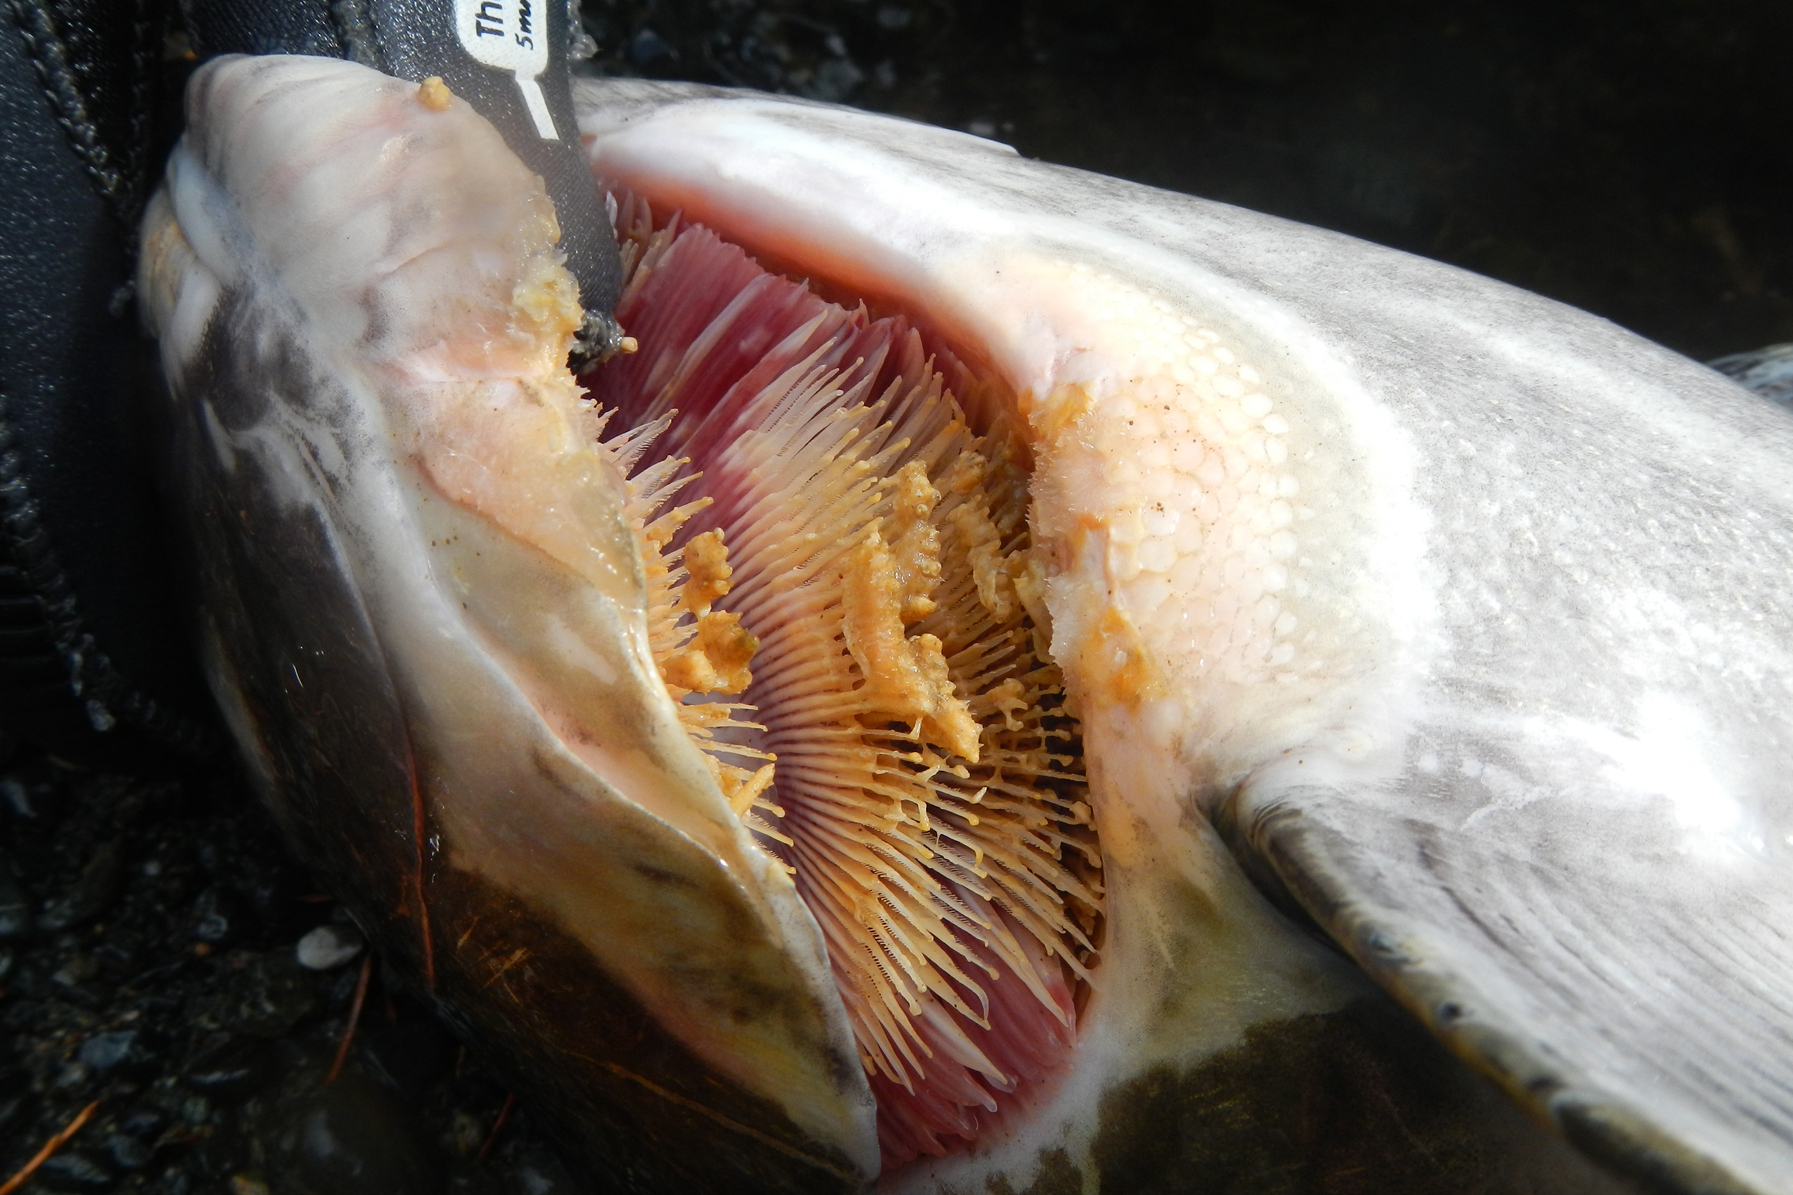 Gill rot in a dead fish taken from the Klamath River in California on July 23, 2014. Photo: Courtesy of Frankie Myers